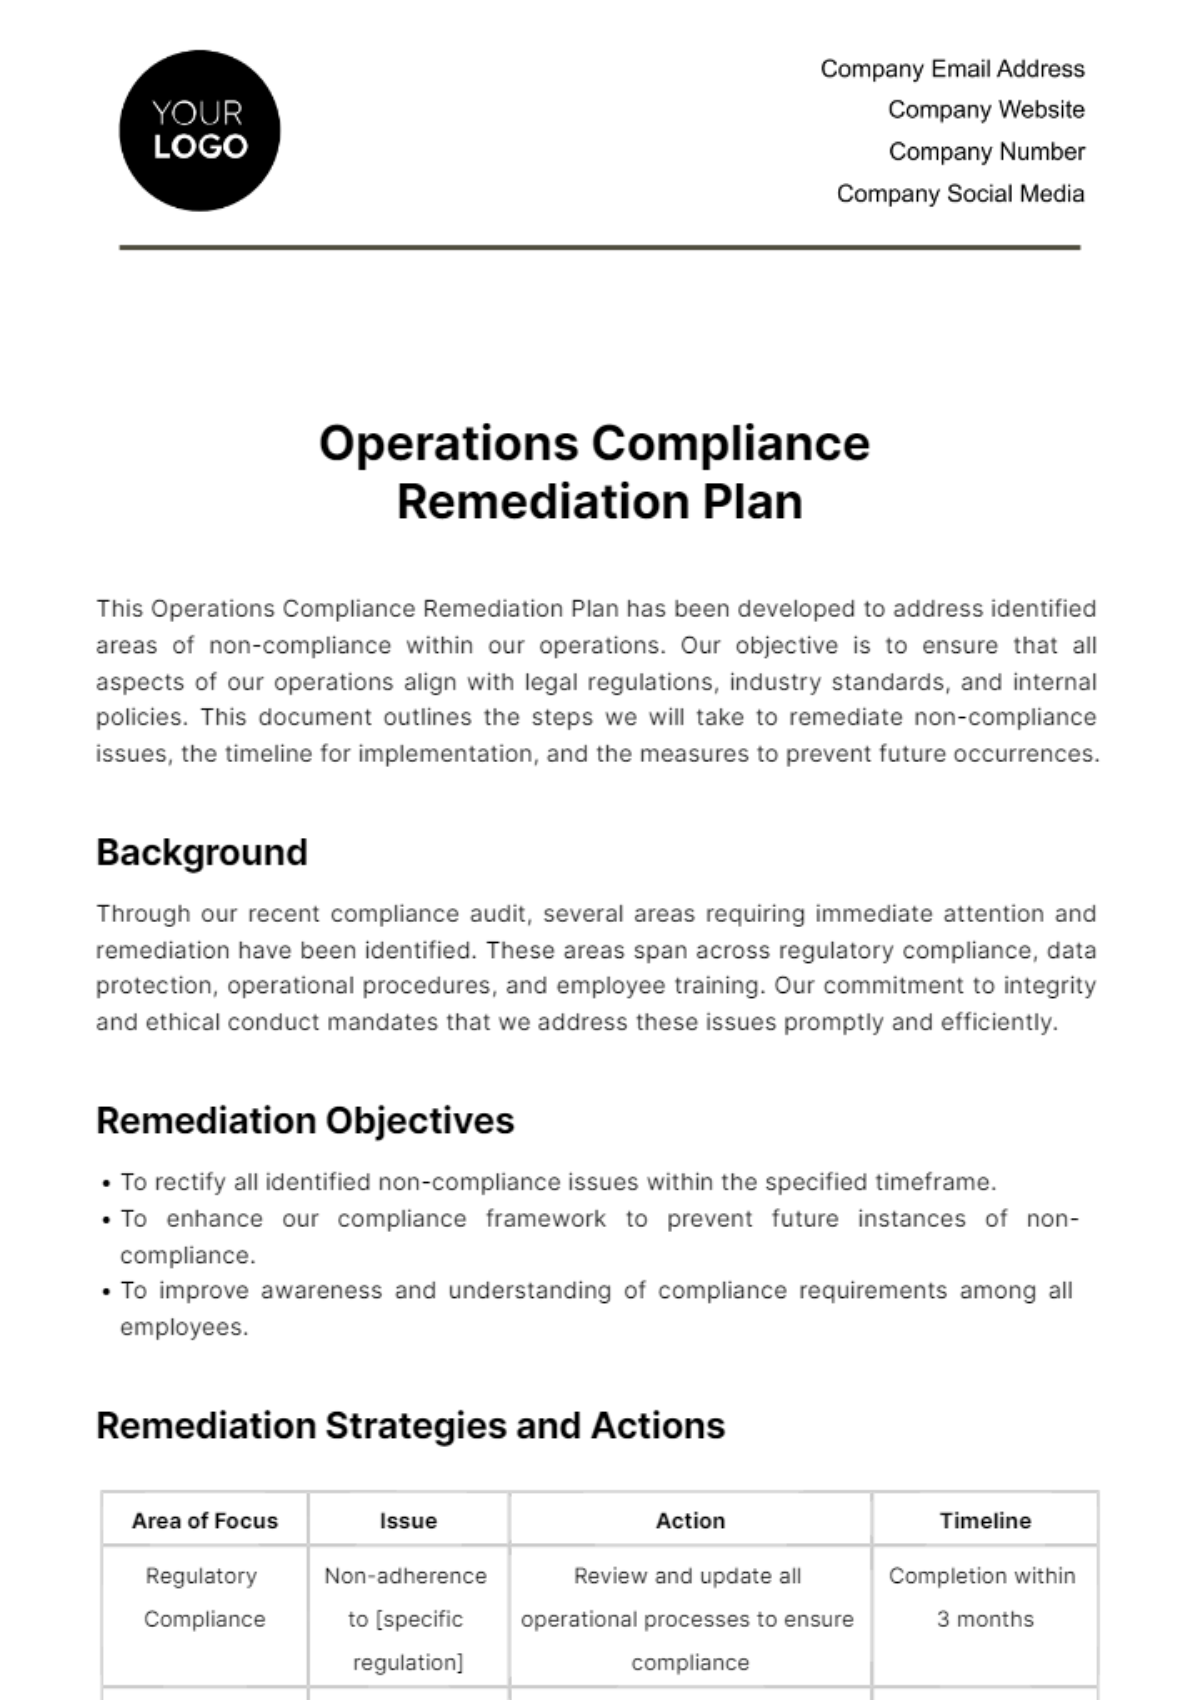 Free Operations Compliance Remediation Plan Template